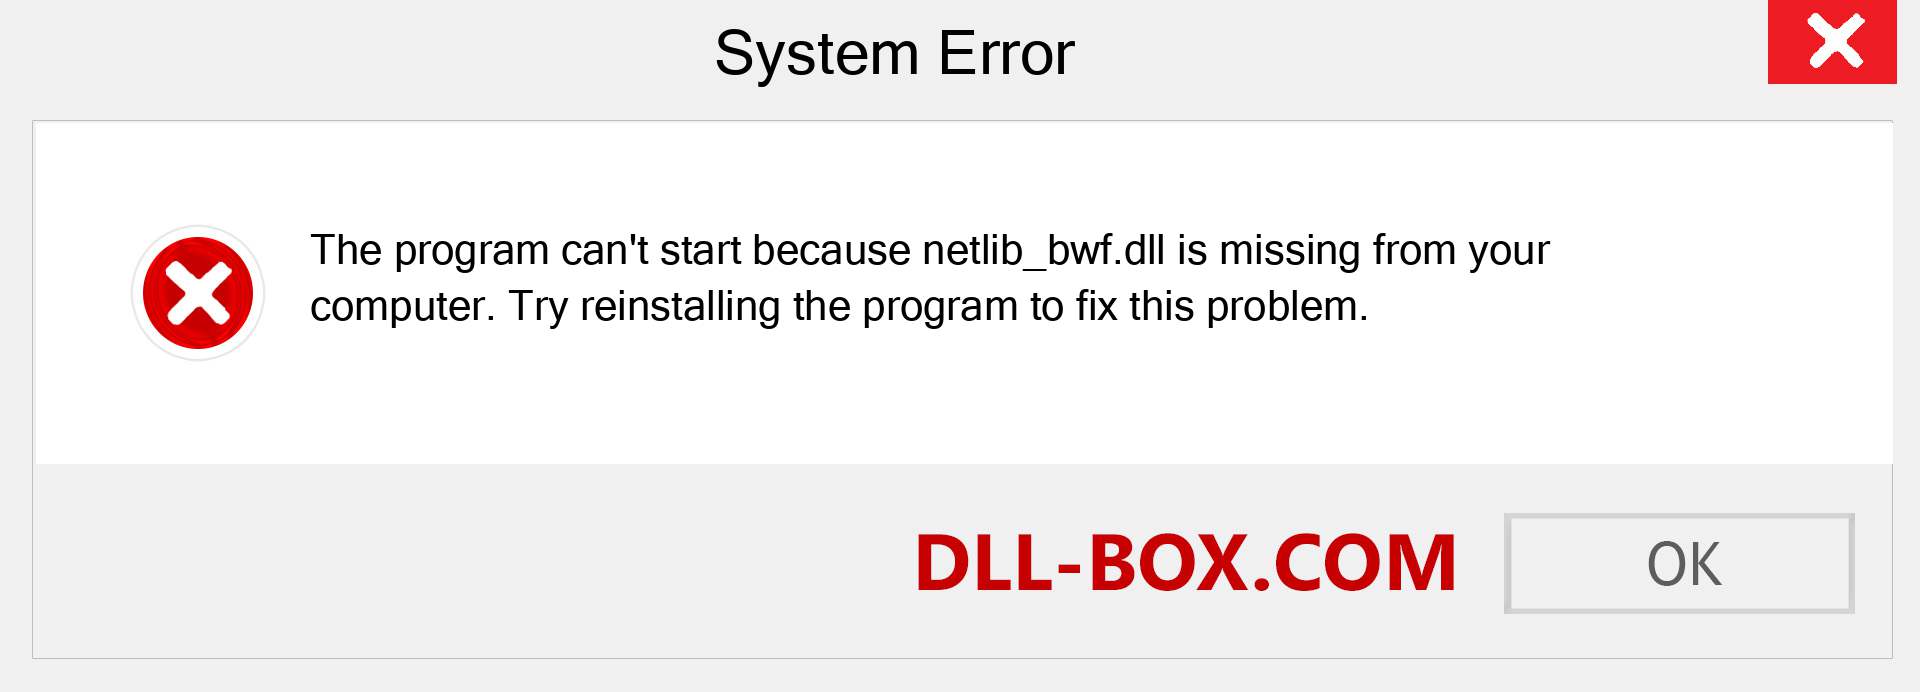  netlib_bwf.dll file is missing?. Download for Windows 7, 8, 10 - Fix  netlib_bwf dll Missing Error on Windows, photos, images